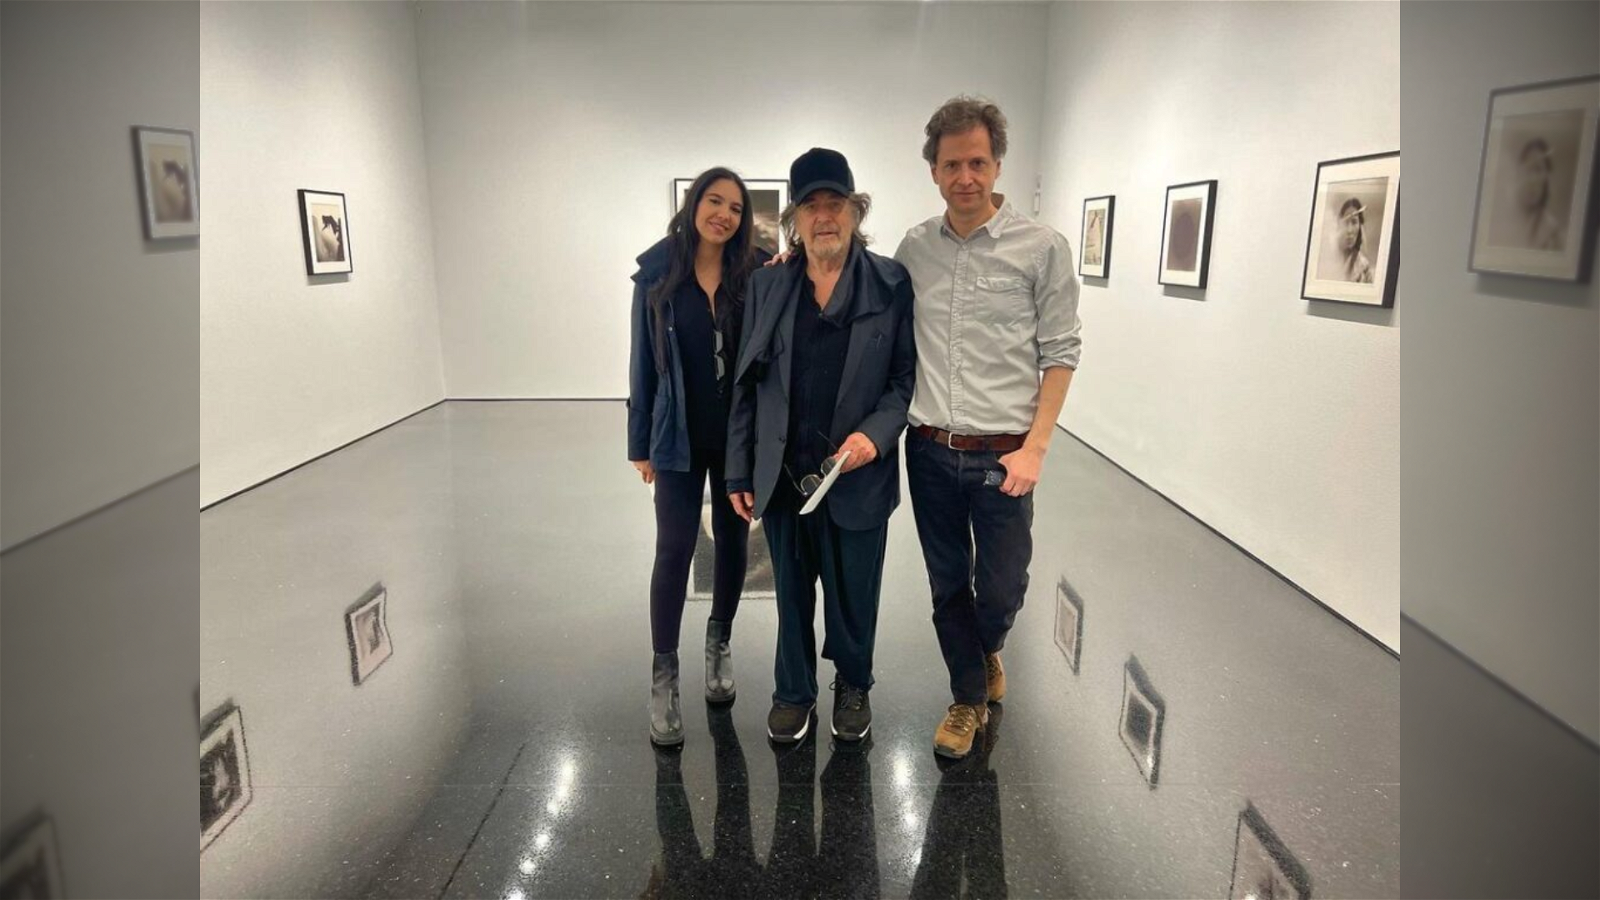 Al Pacino poses with his girlfriend Noor Alfallah and another man in an art gallery.